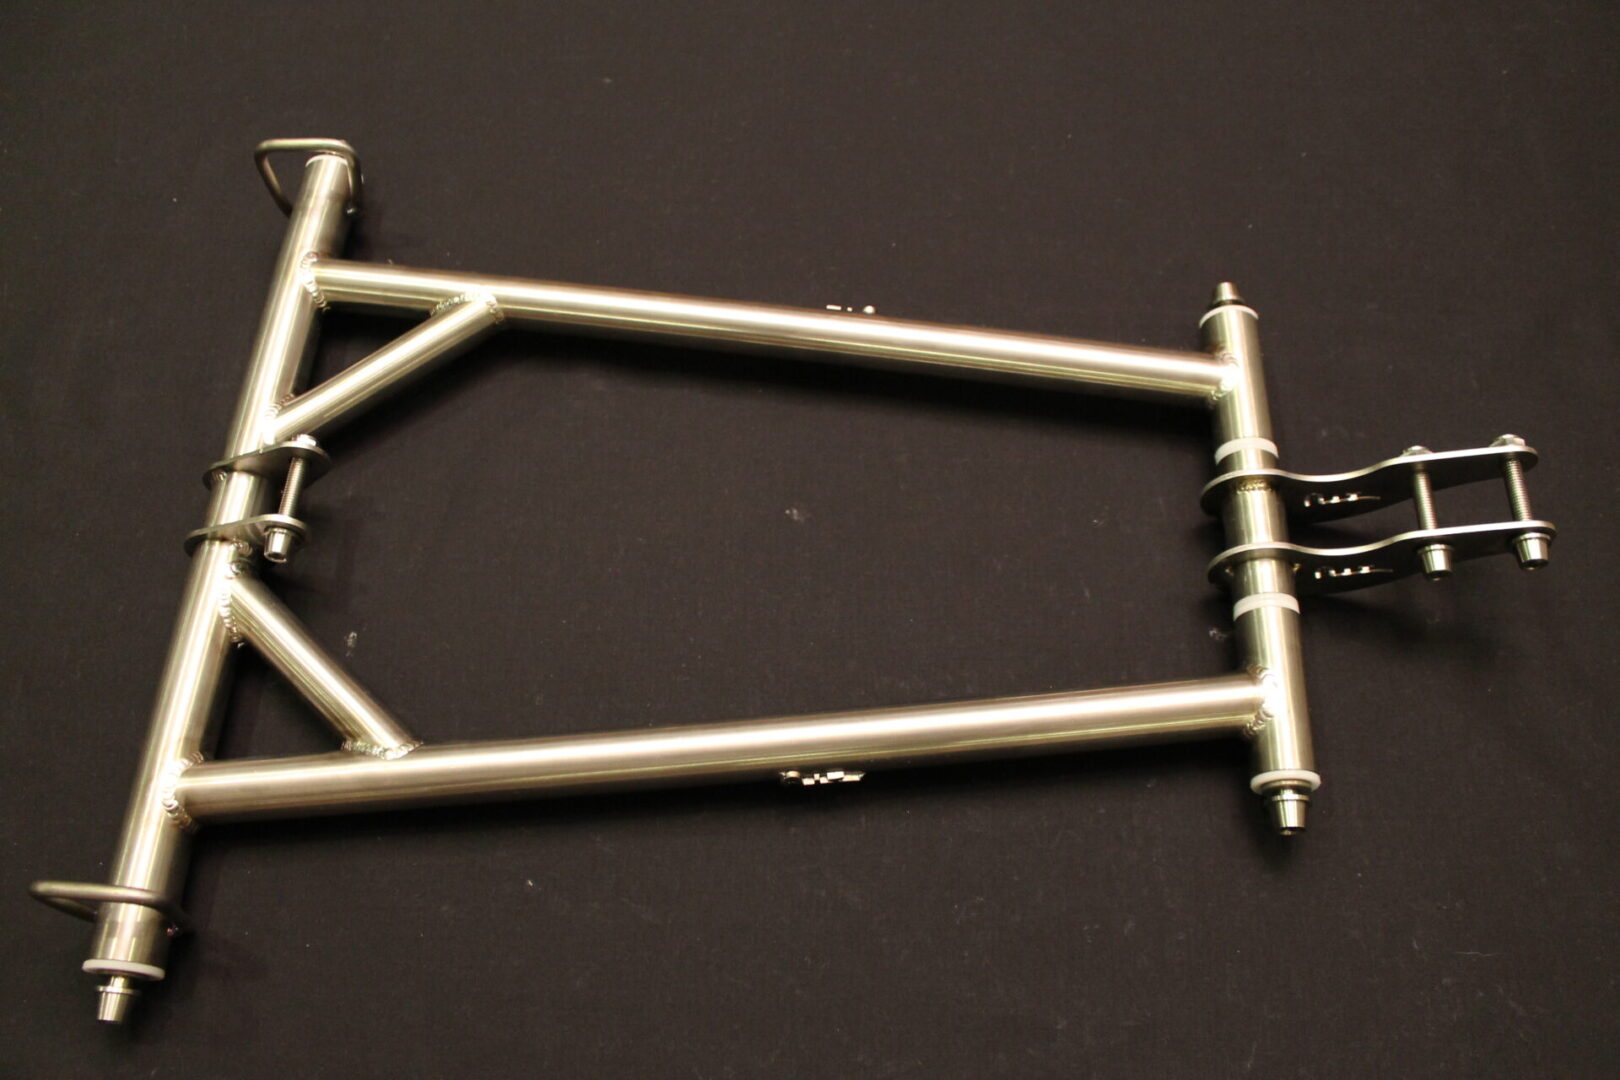 An image of a 11-23 Pro/Axys Titanium Rear Suspension Front Torque Arm on a black surface.